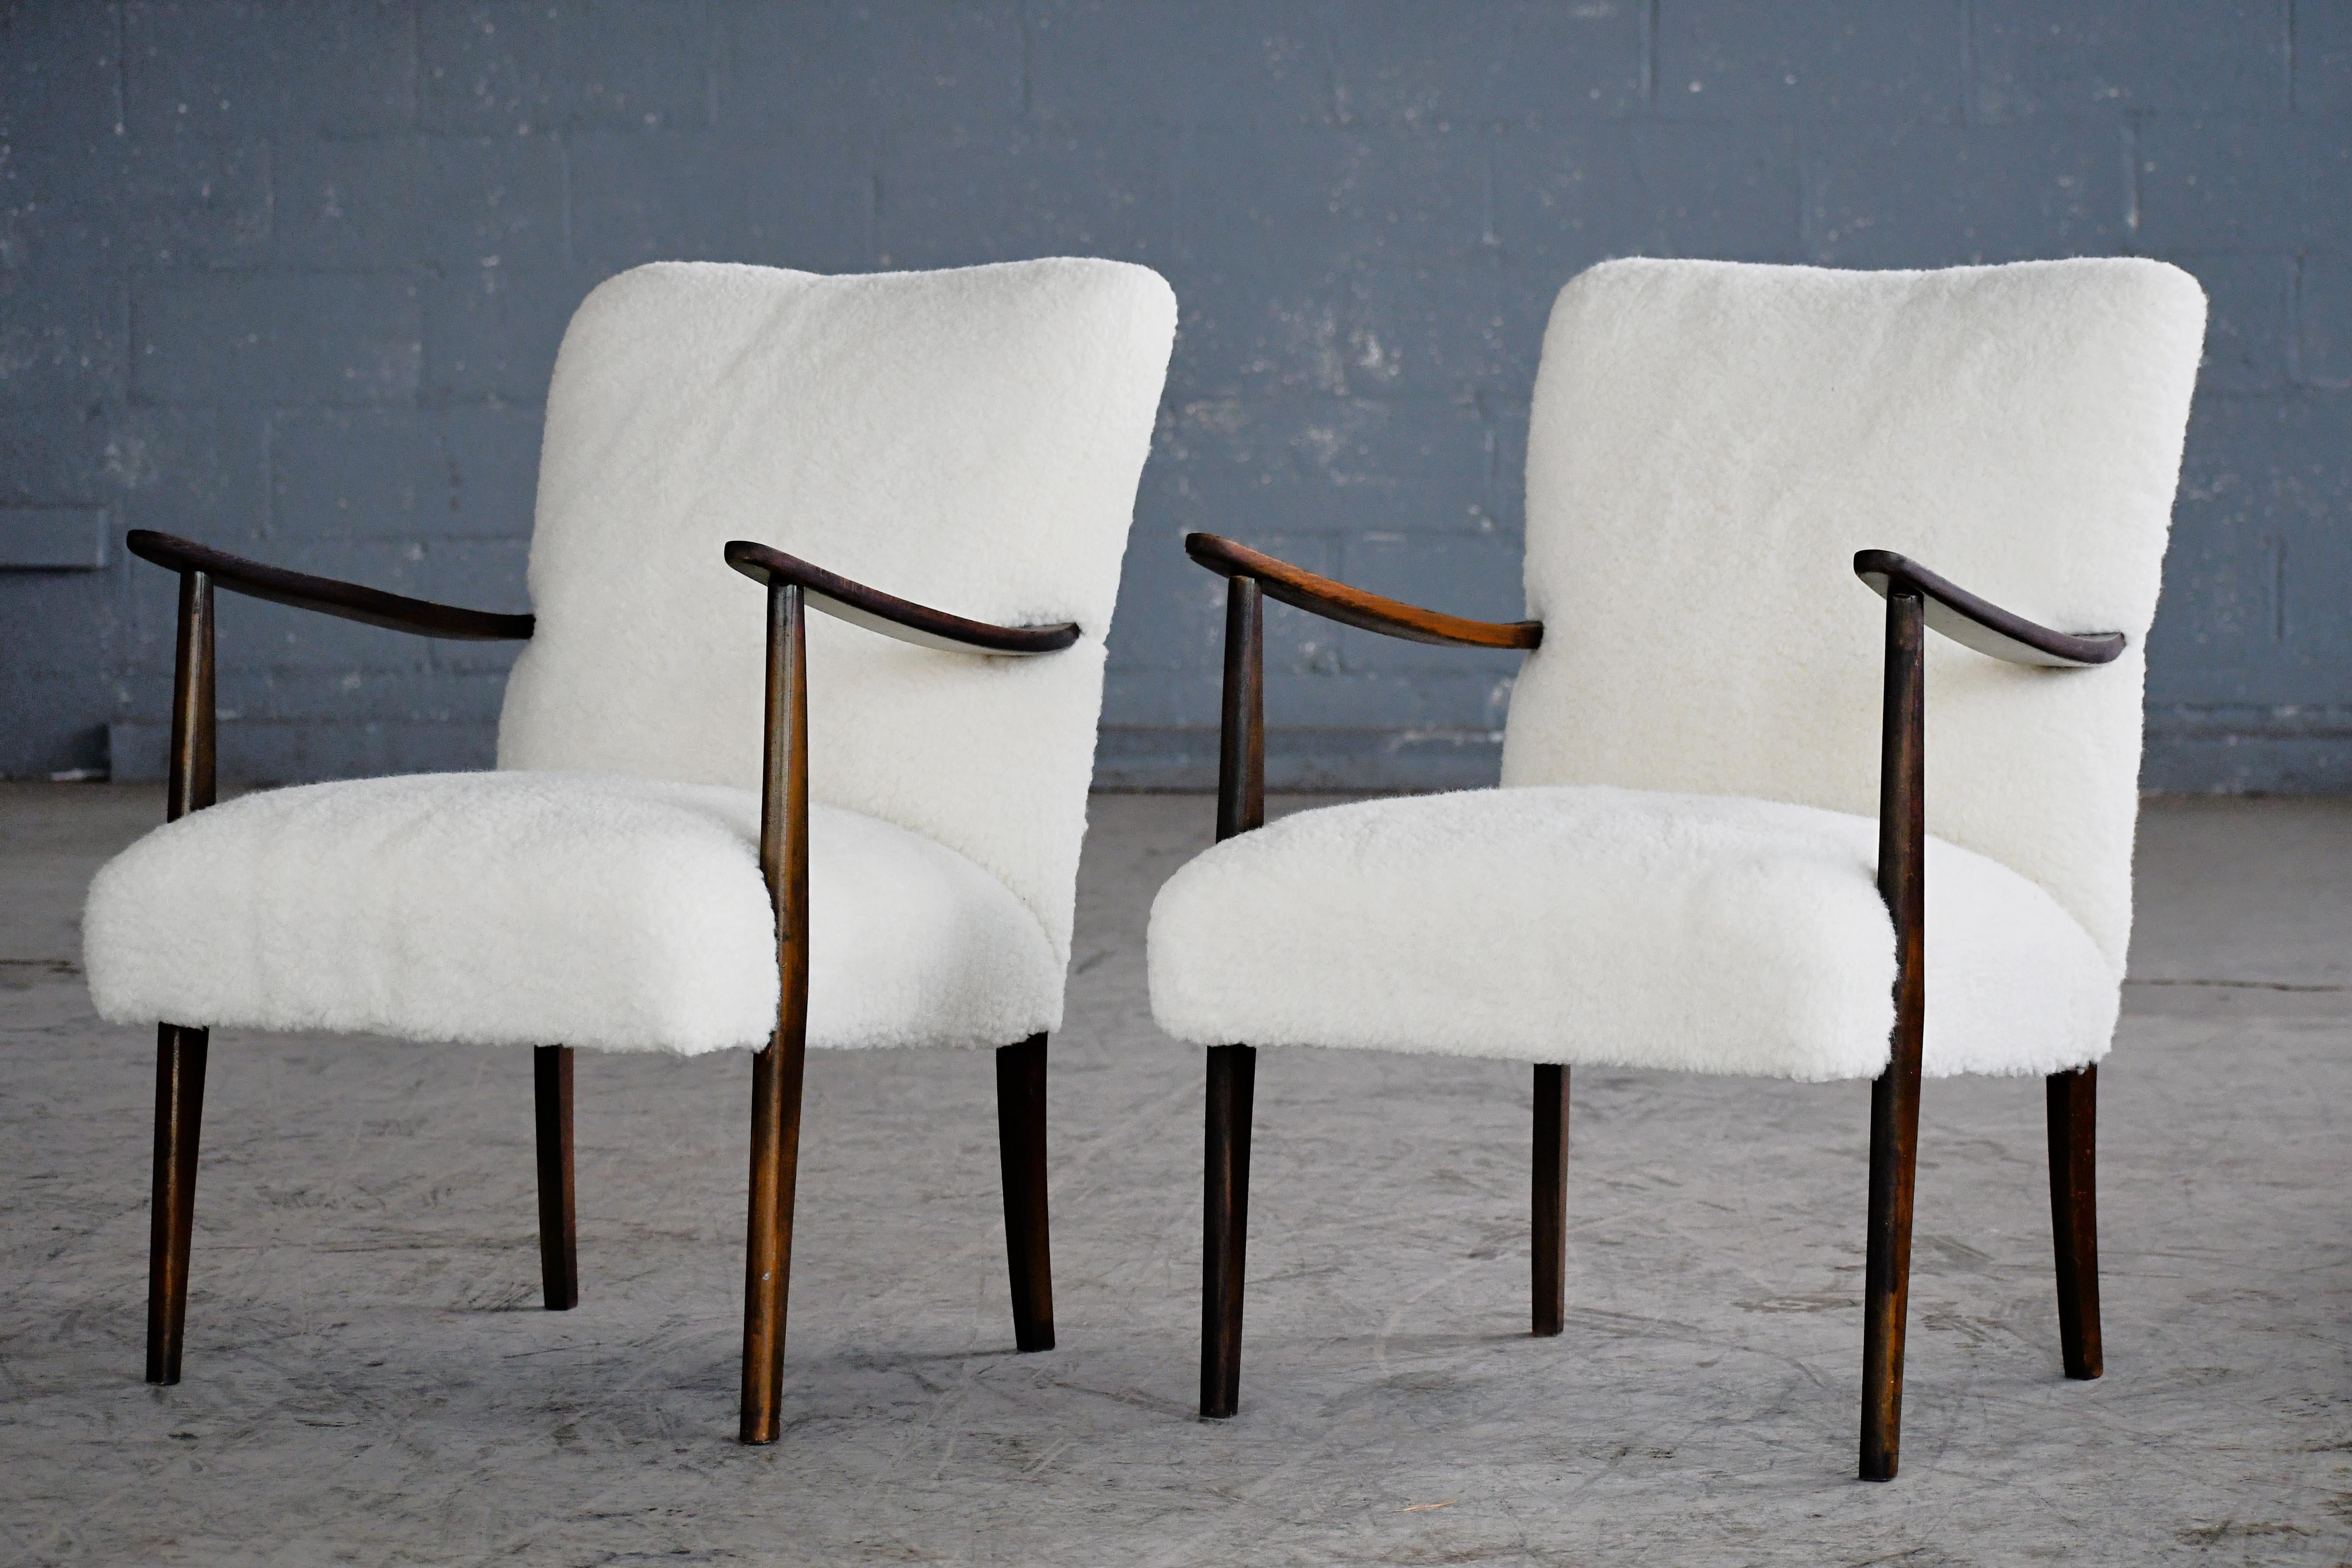 Lovely elegant Danish easy style chairs probably made around 1950. These chairs are very early examples of the style that became the famous Danish easy chair of the 1950s and 1960s in the tradition of Arne Vodder and Hans Wegner. The wood from